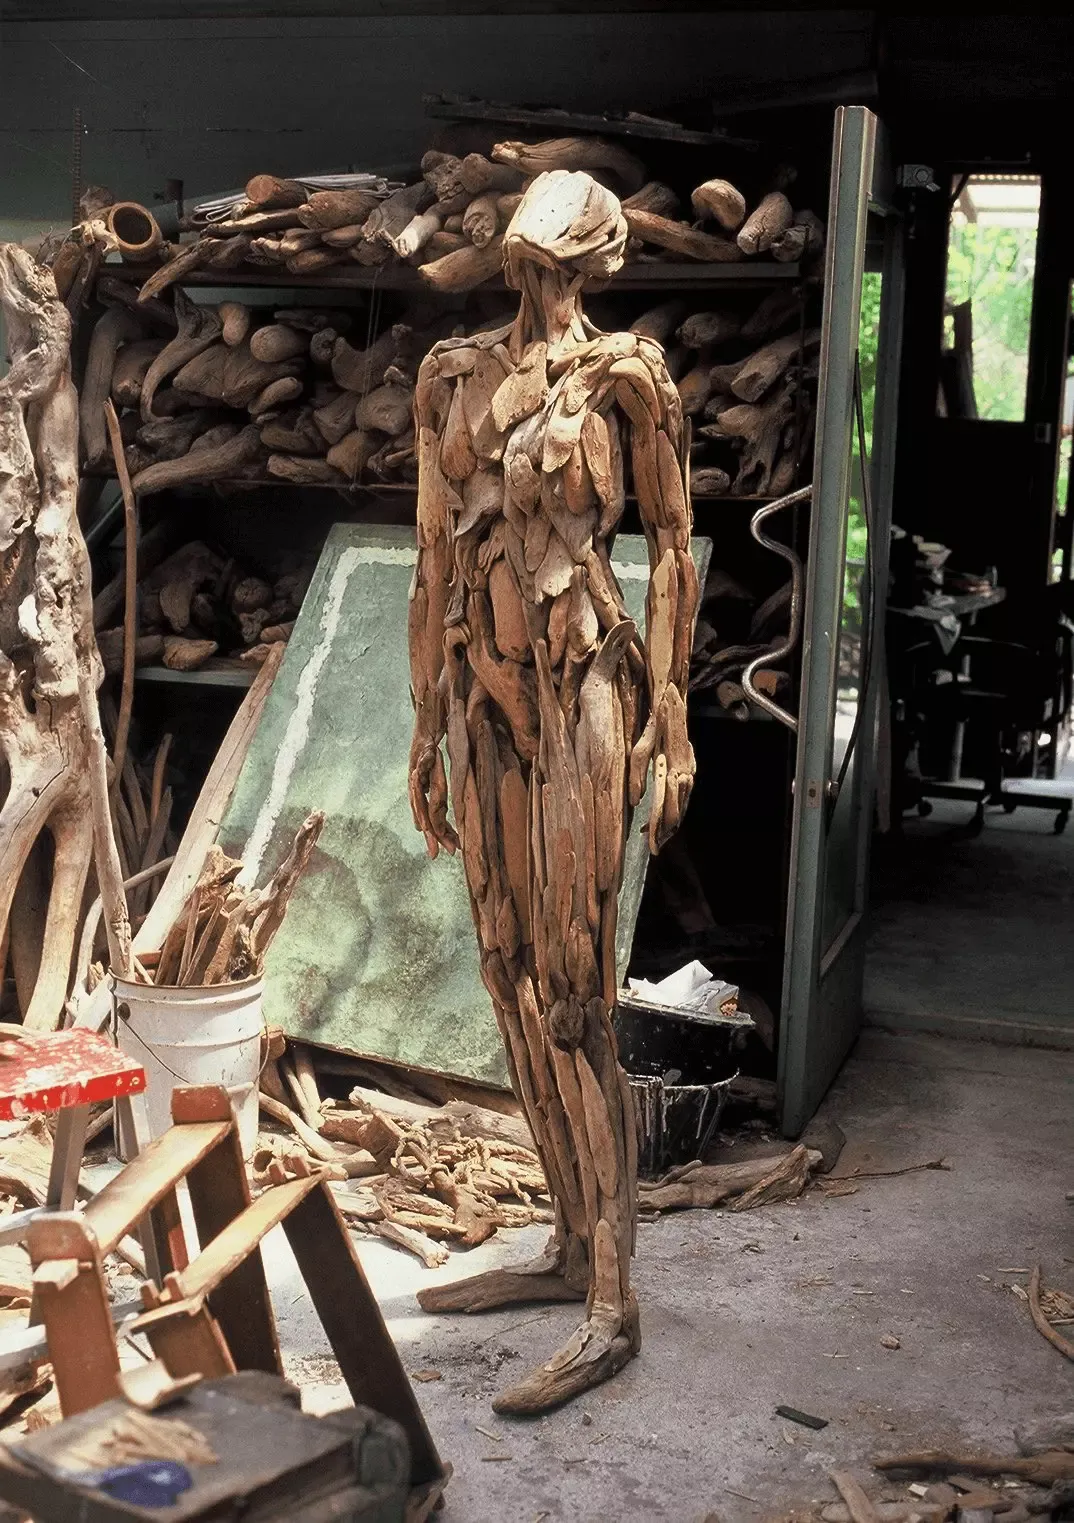 The haunted driftwood sculptures